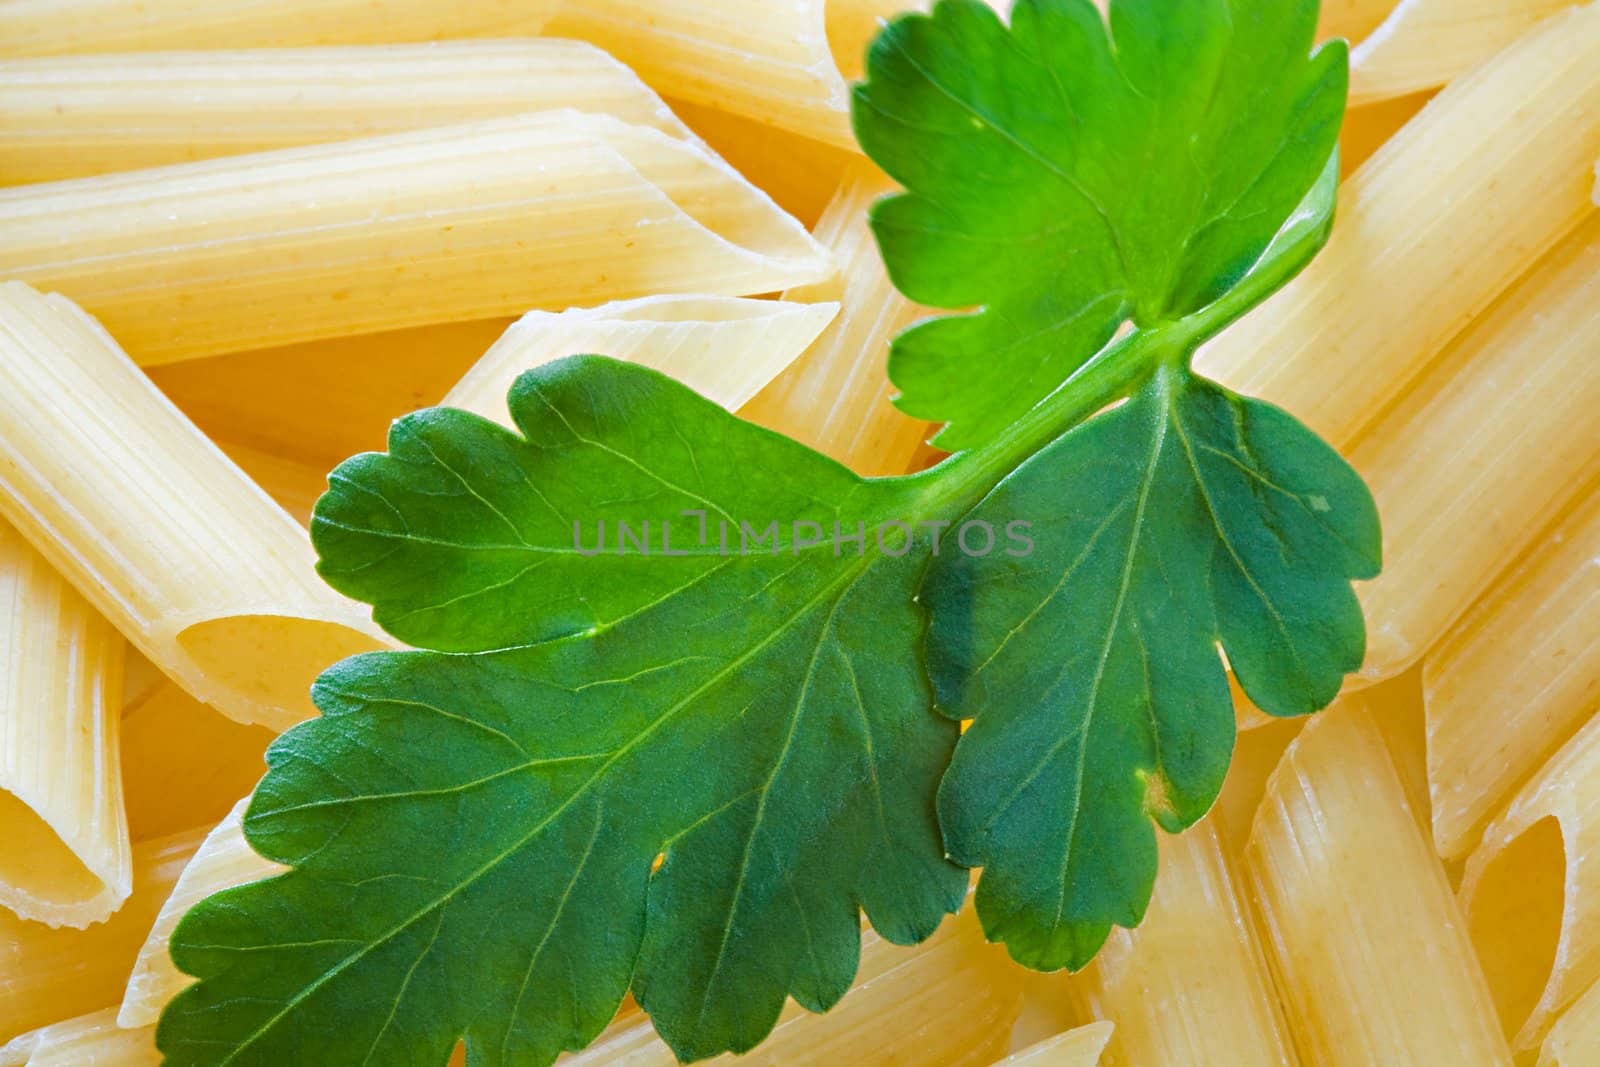 Macaroni with a leaf of parsley close up
